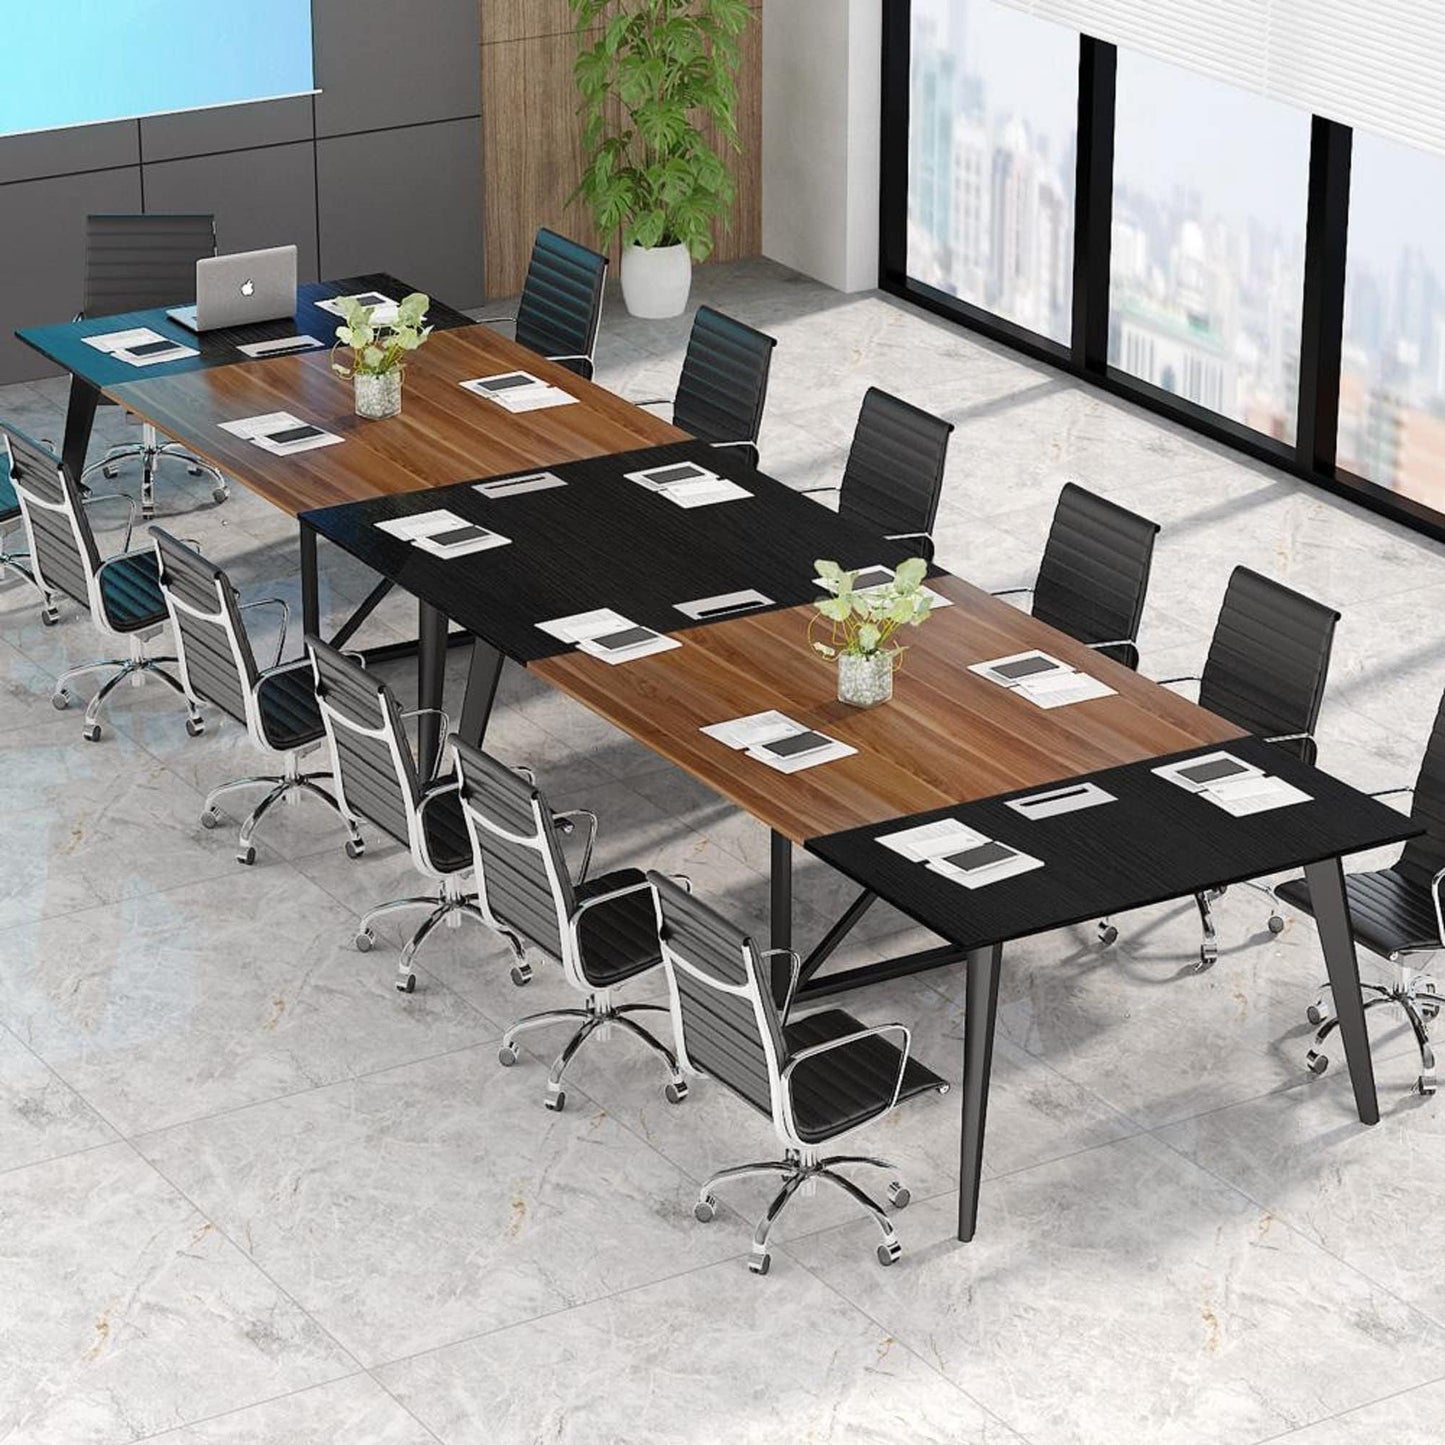 8FT Conference Table, 94.5L x 47.2W inch Large Meeting Table